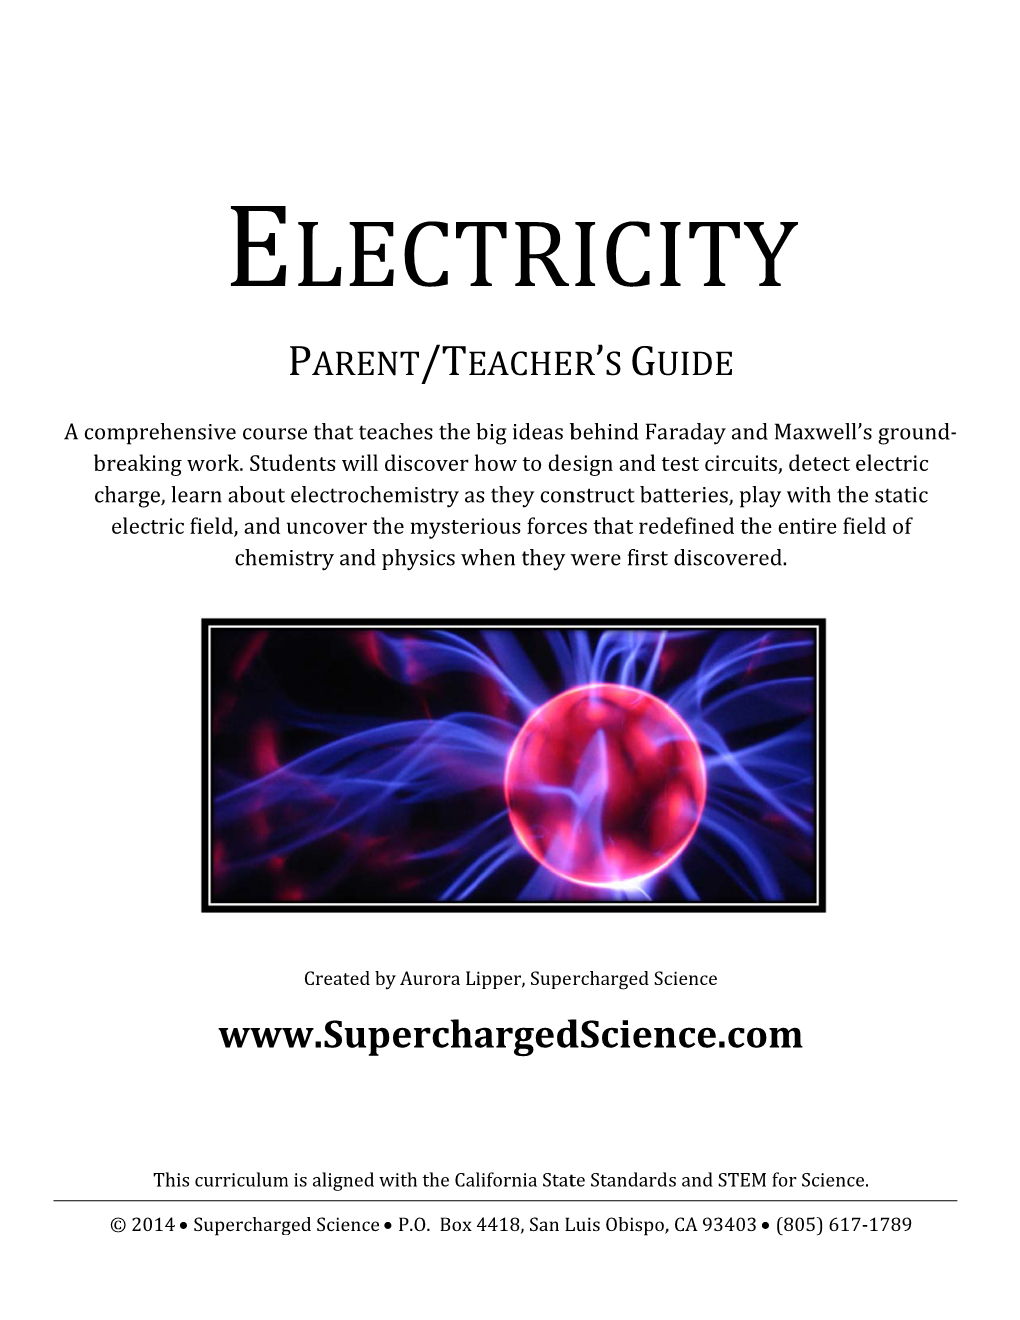 Static Electricity Study Kit and You Will Have an Easy Way to Keep Track of the Materials and Build Accountability Into the Program for the Kids